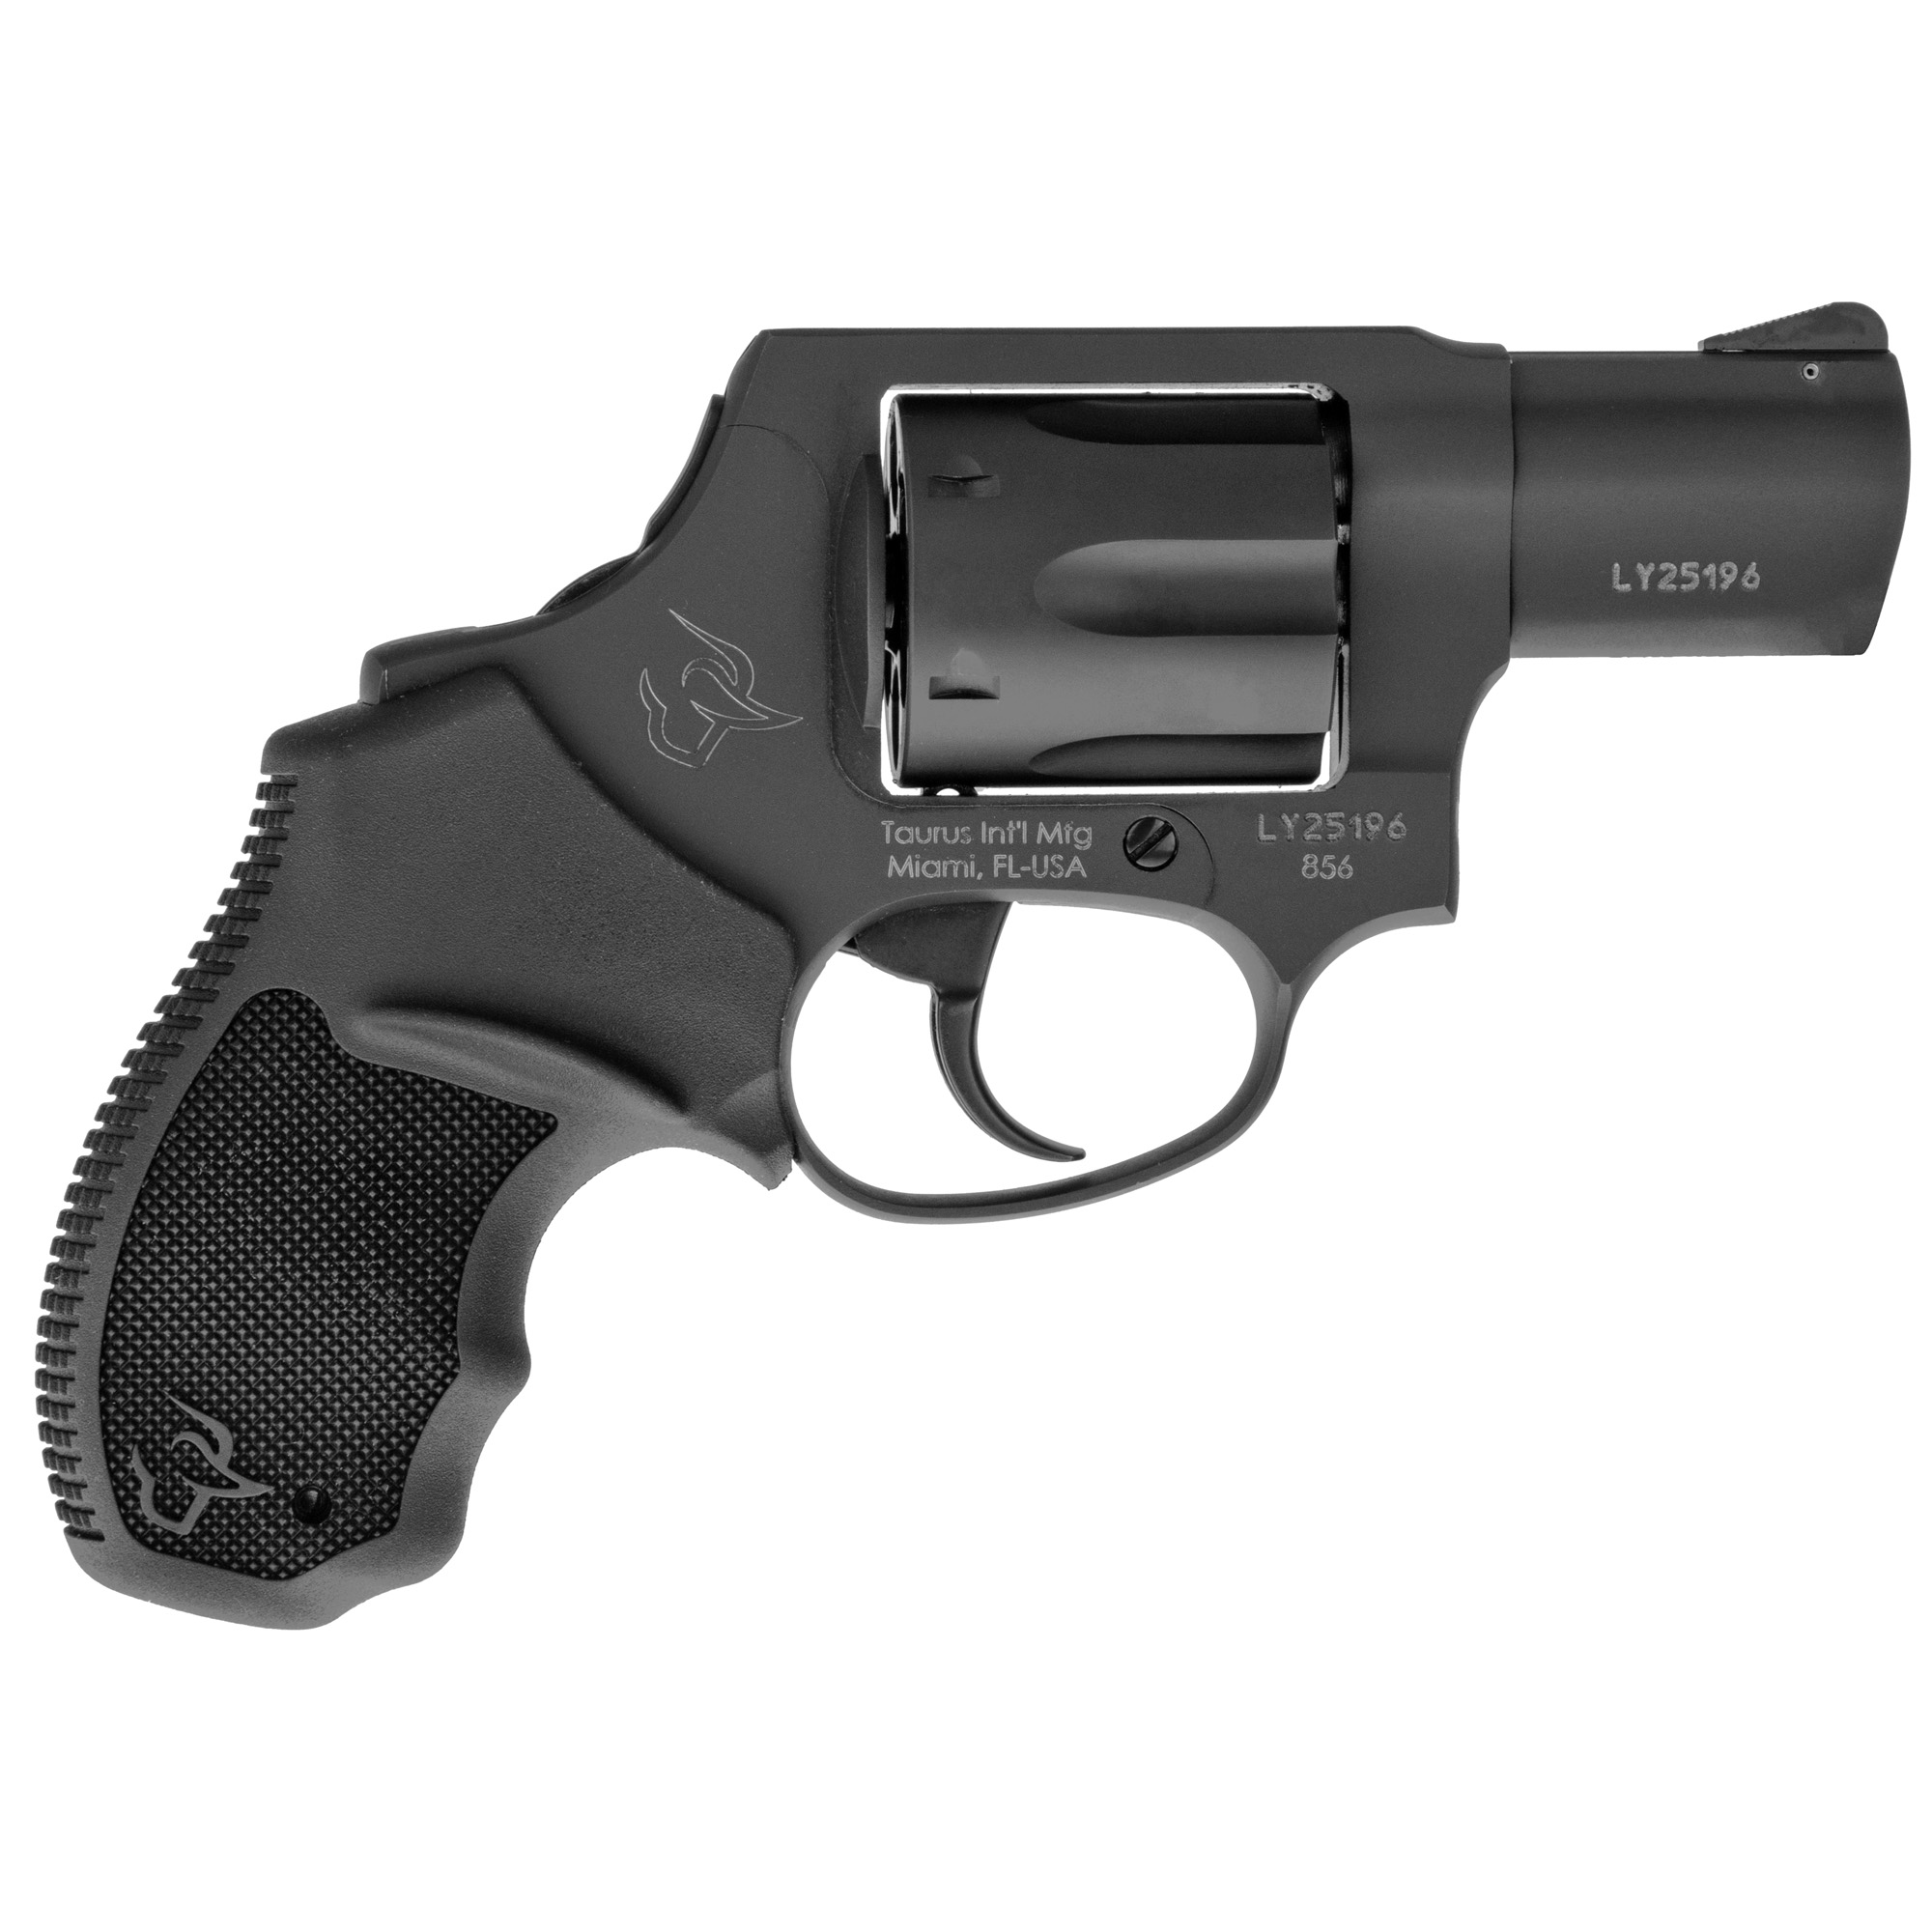 Taurus, Model 856CH, Double Action Only, Metal Frame Revolver, Small Frame, 38 Special, 2" Barrel, Steel, Matte Finish, Black, Rubber Grips, Fixed Sights, 6 Rounds, Concealed Hammer